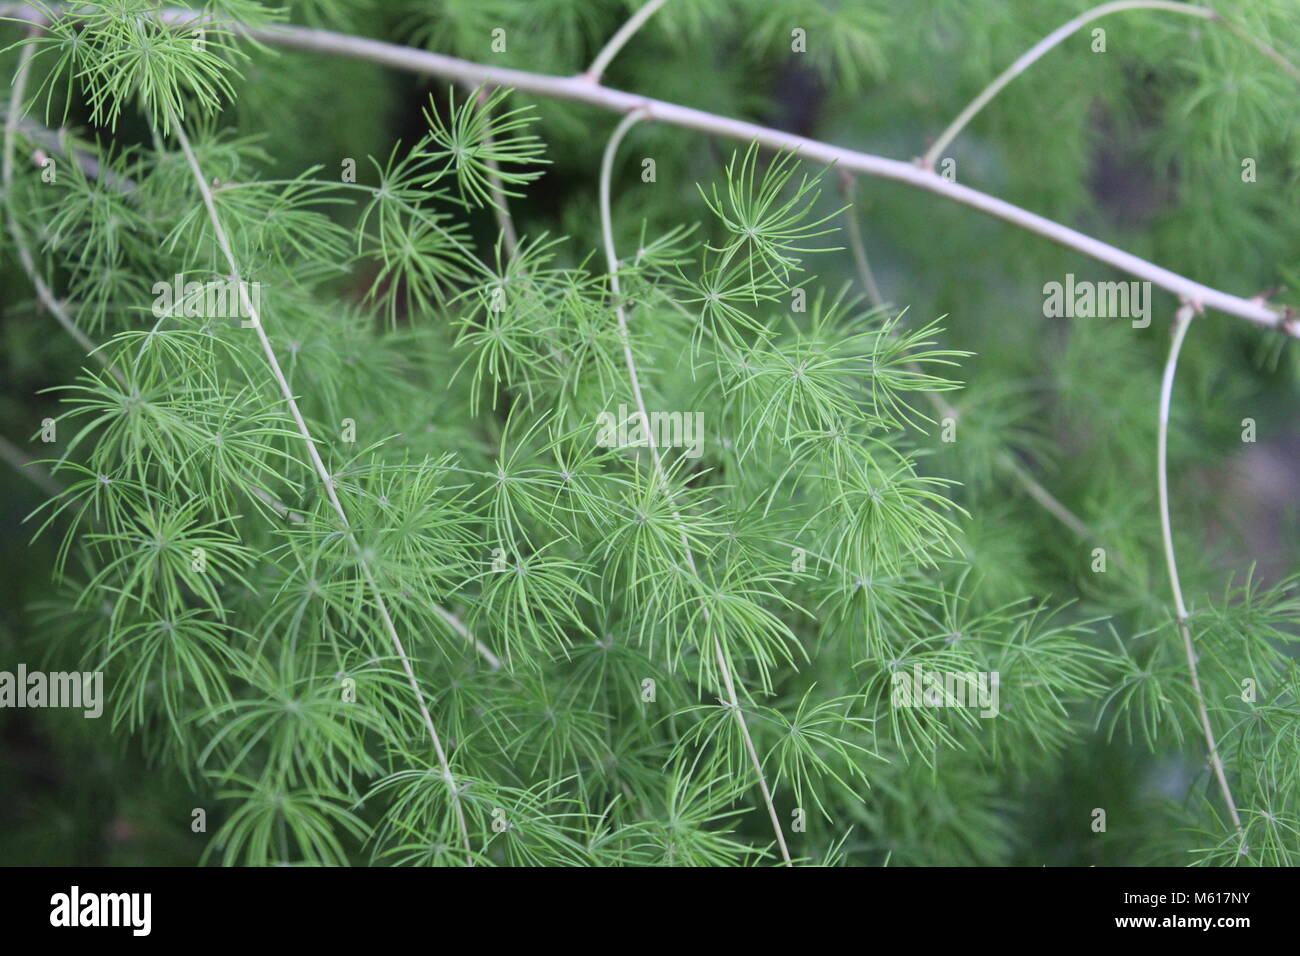 Some nice green plant Stock Photo